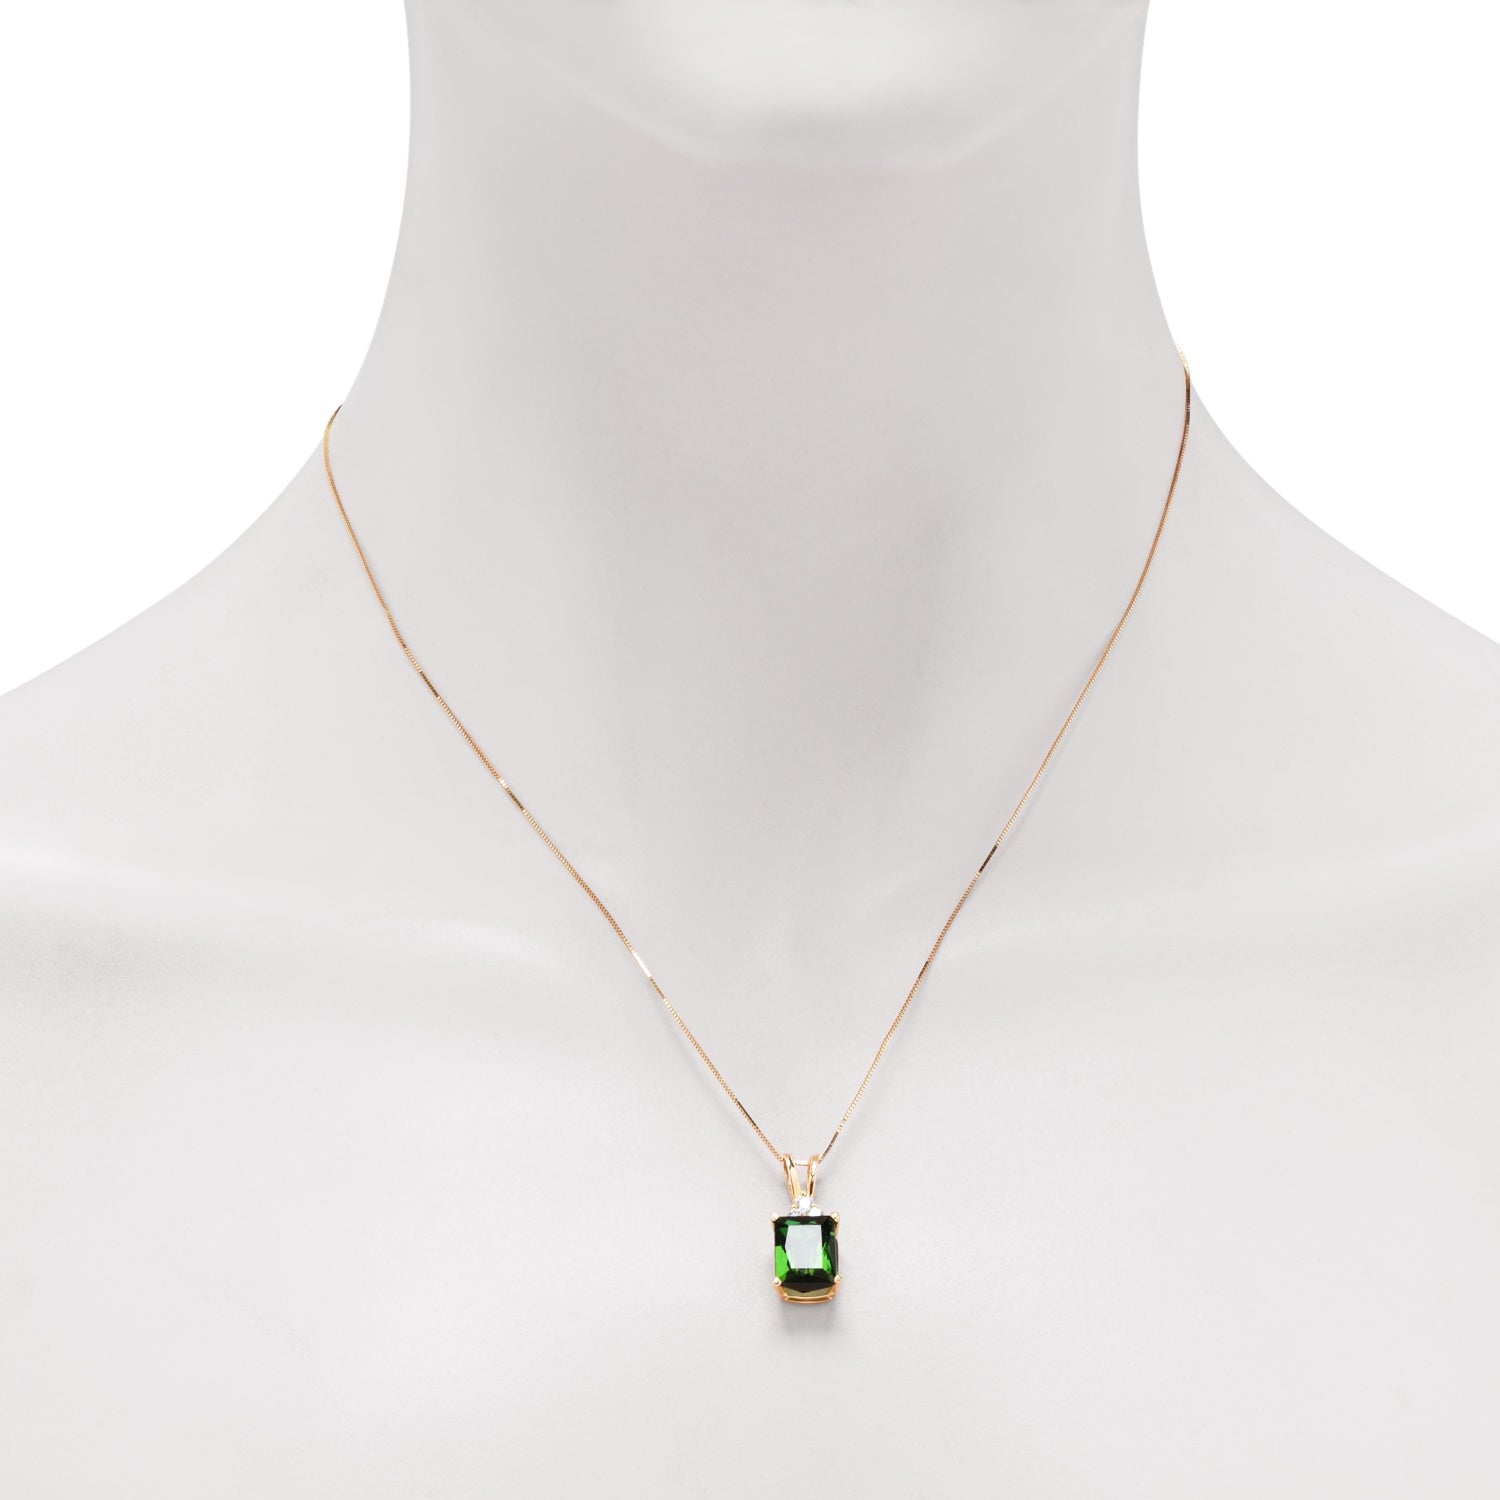 Estate Green Tourmaline Necklace in 14kt Yellow Gold with Diamonds (1/7ct tw)